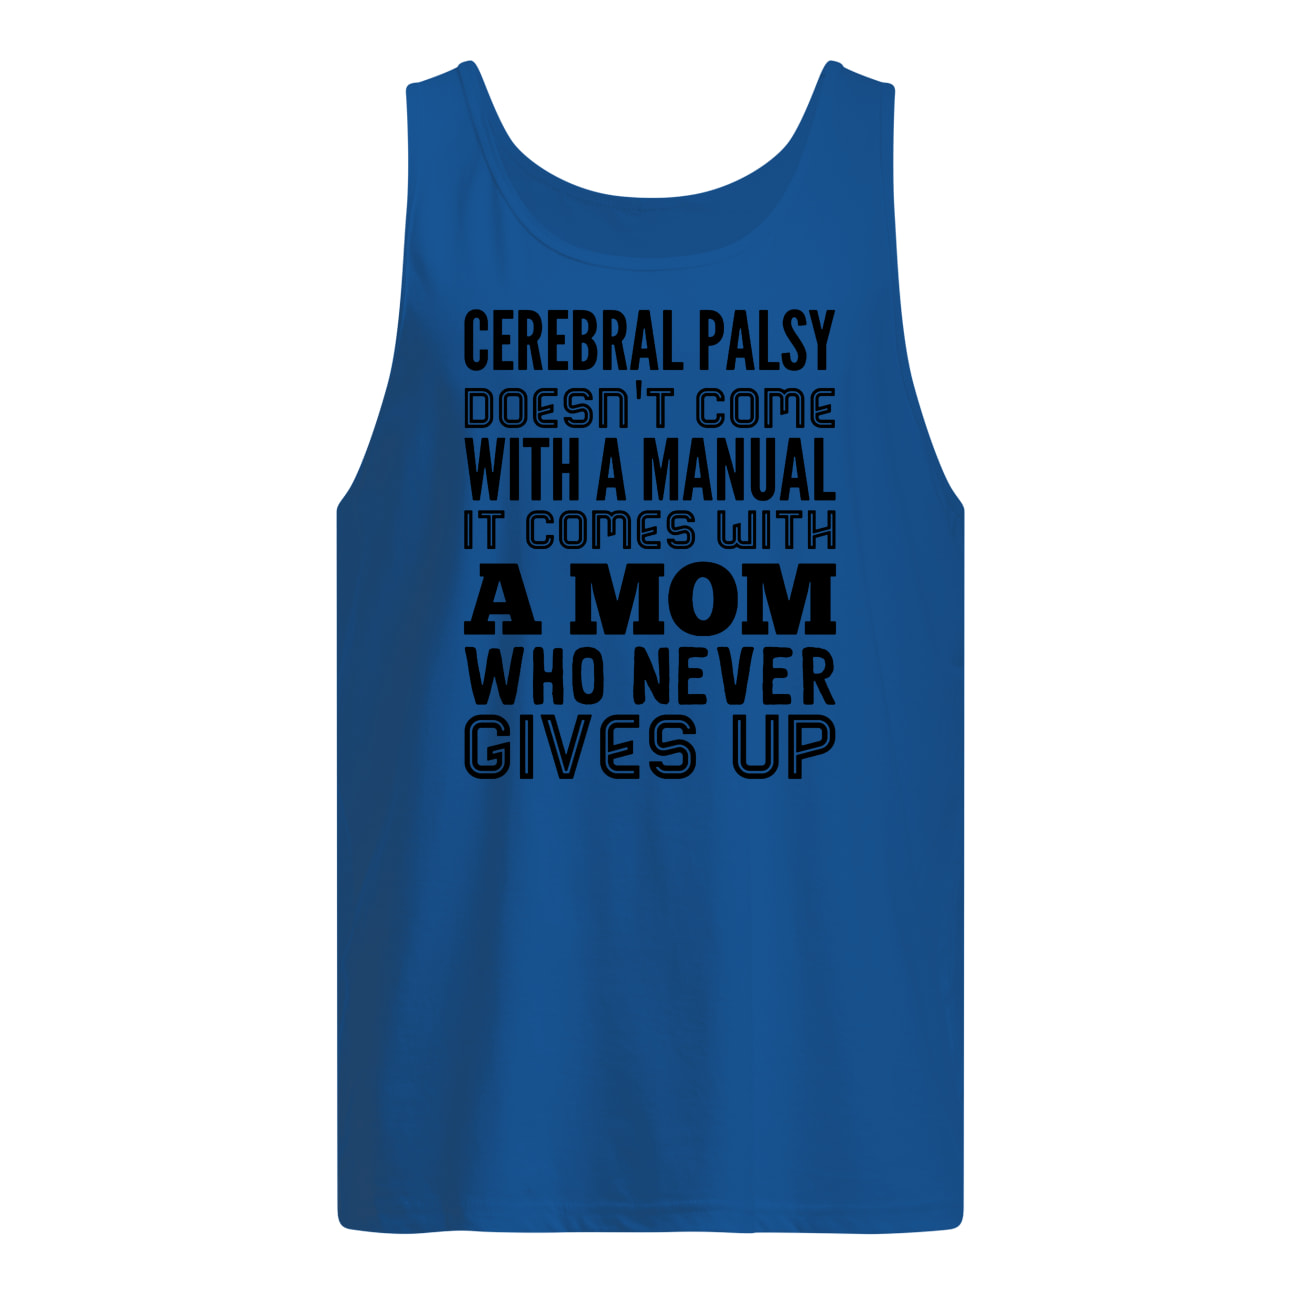 Cerebral palsy doesn't come with a manual it comes with a mom tank top